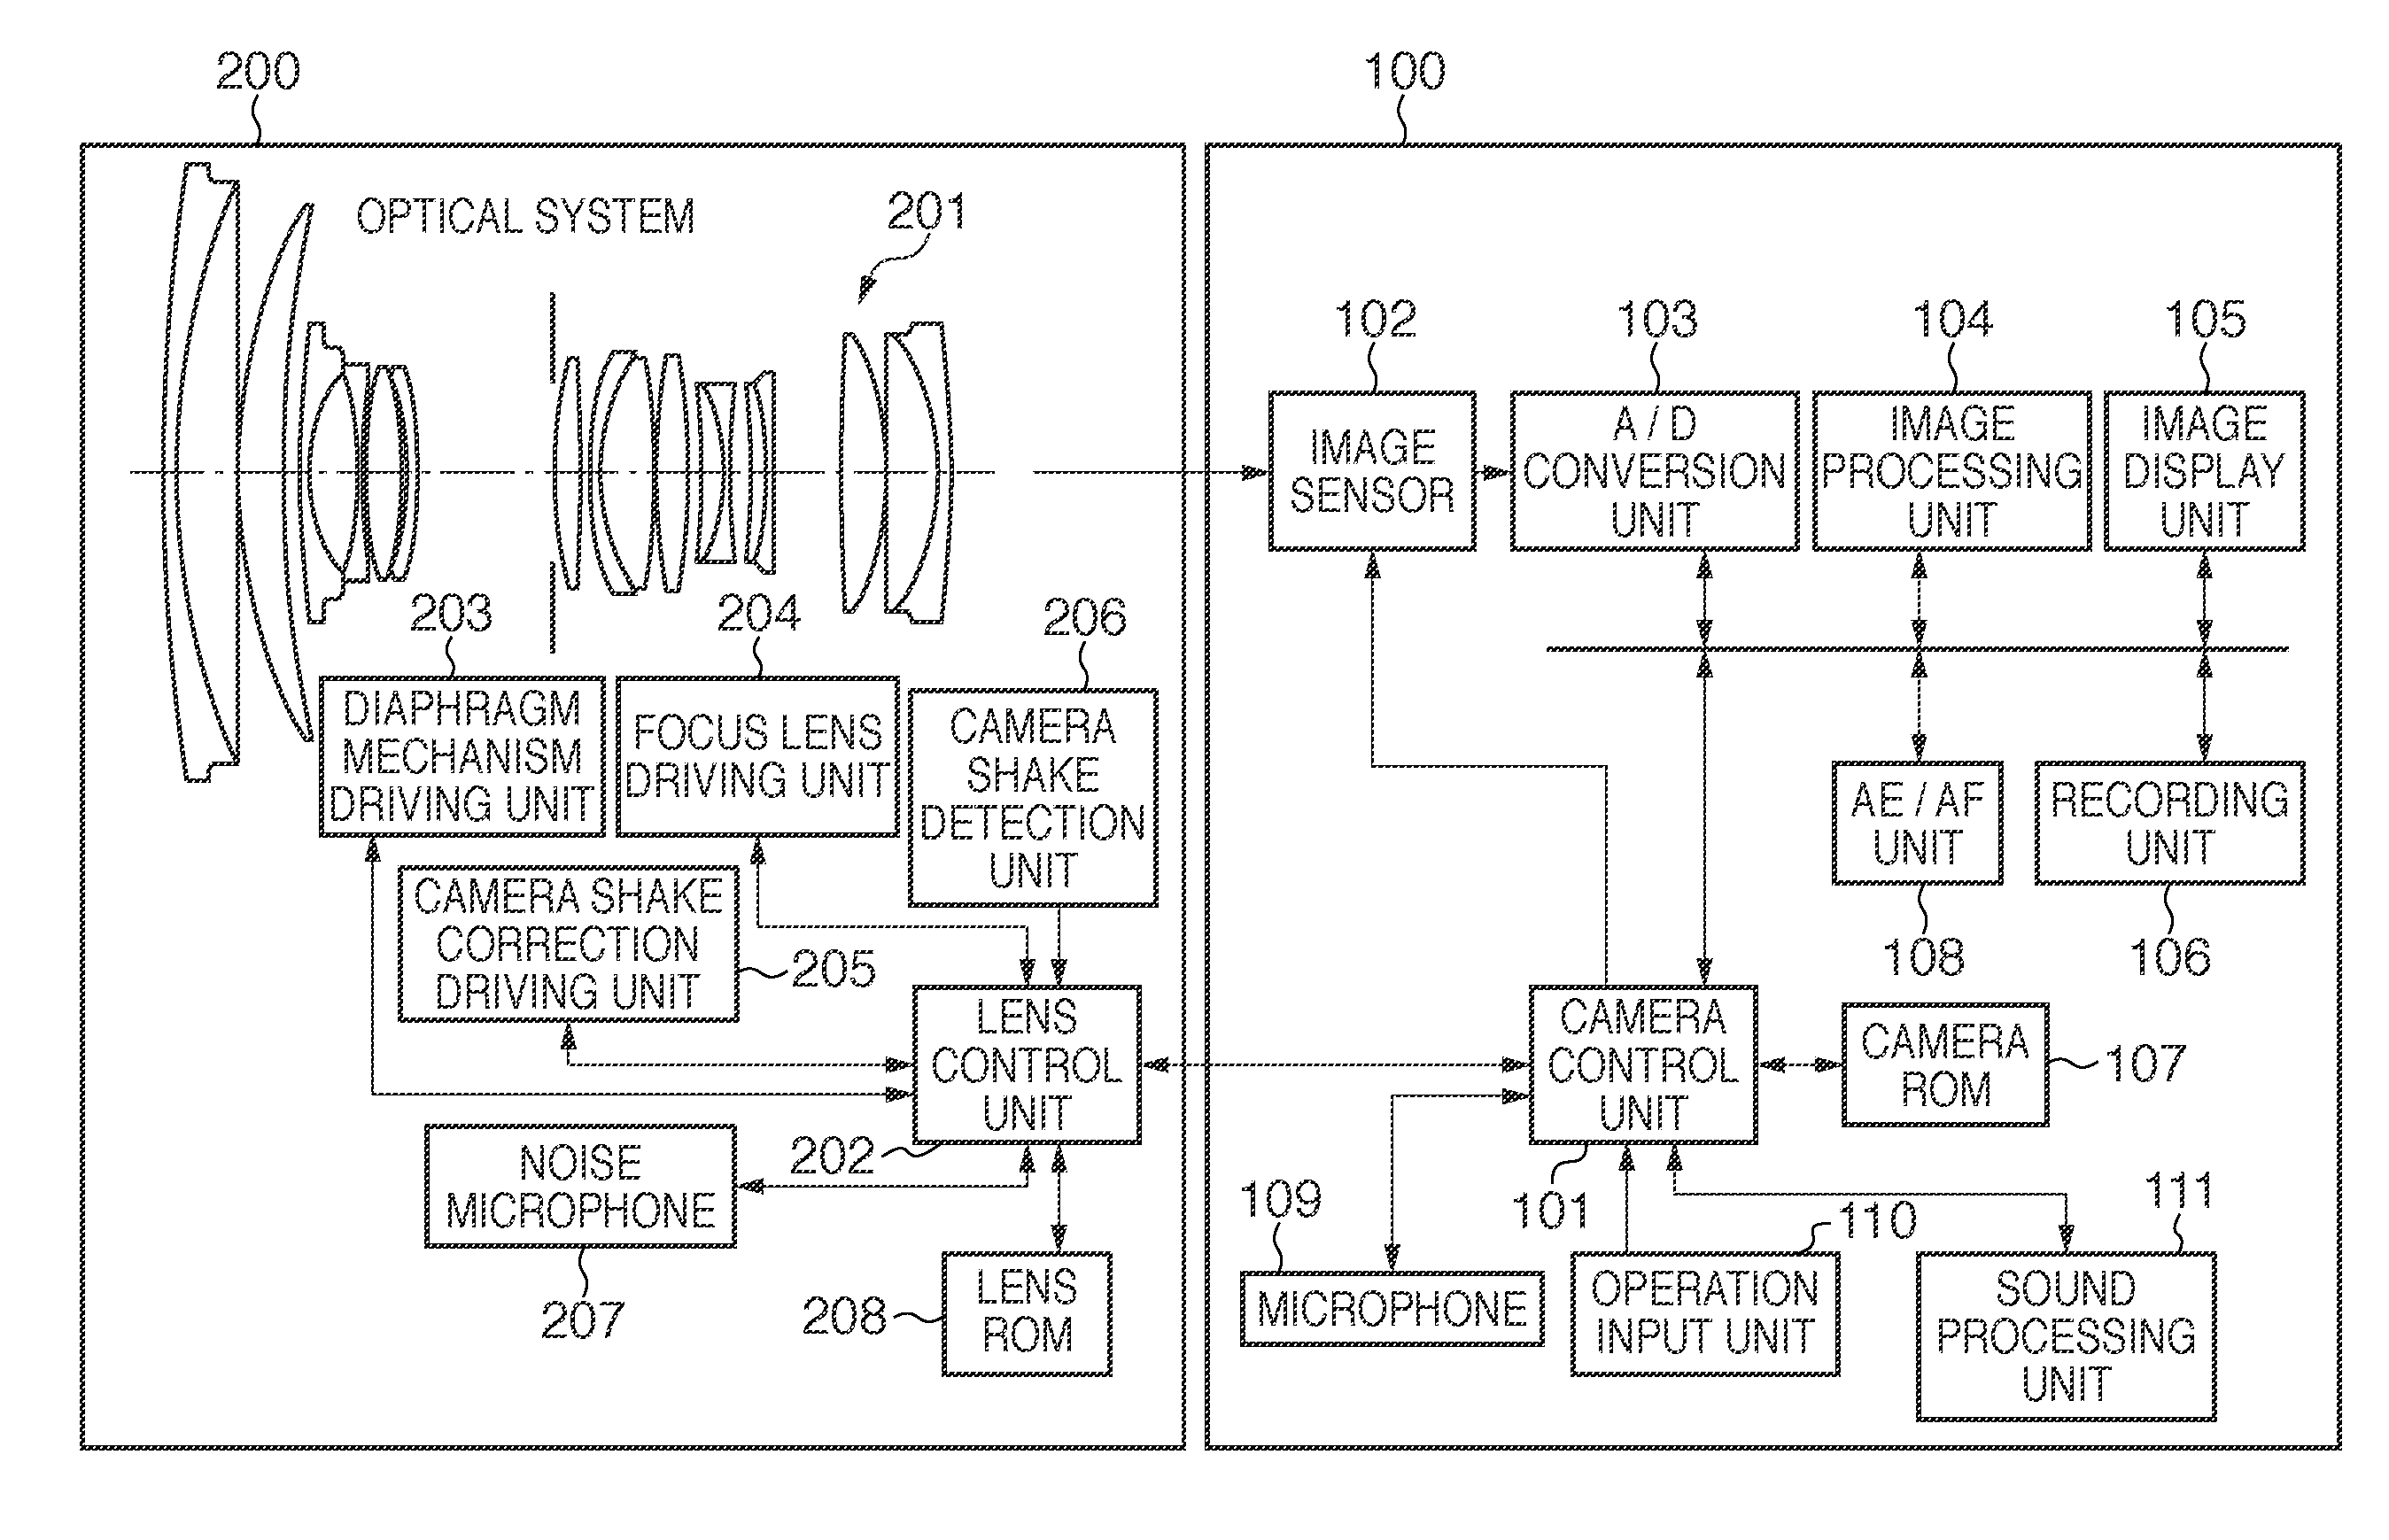 Image sensing apparatus and system